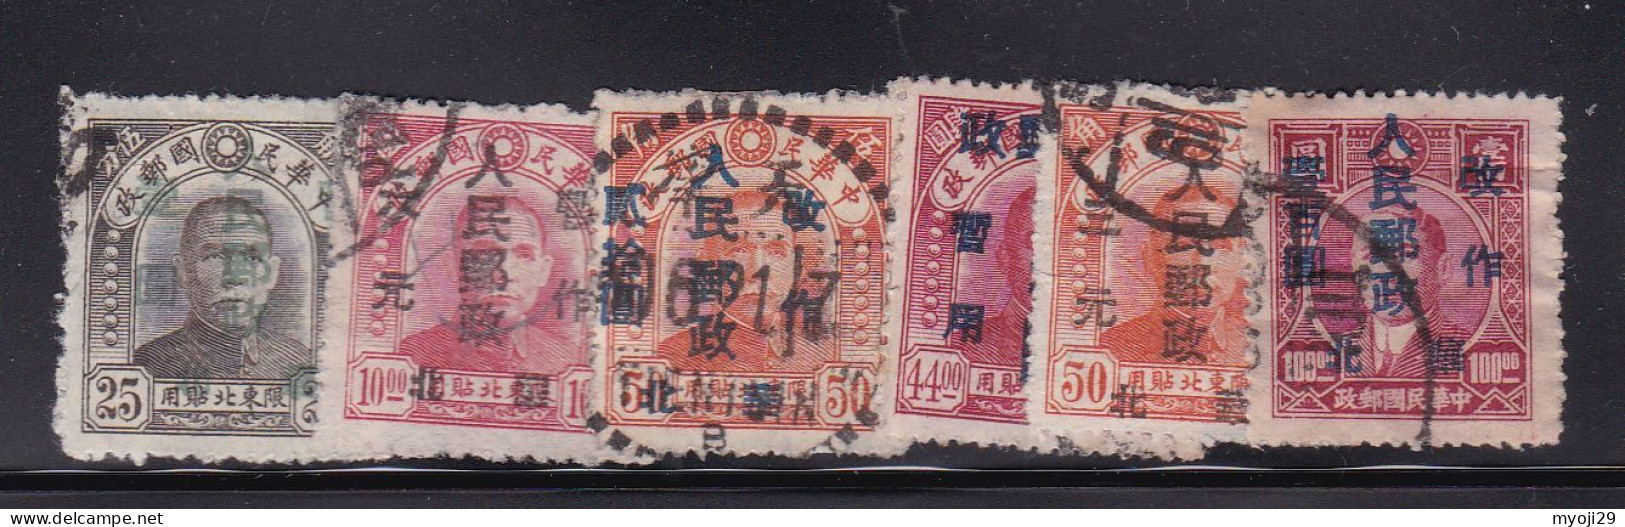 China 1949 Surch "People' Post" Used Lots .various - Usados